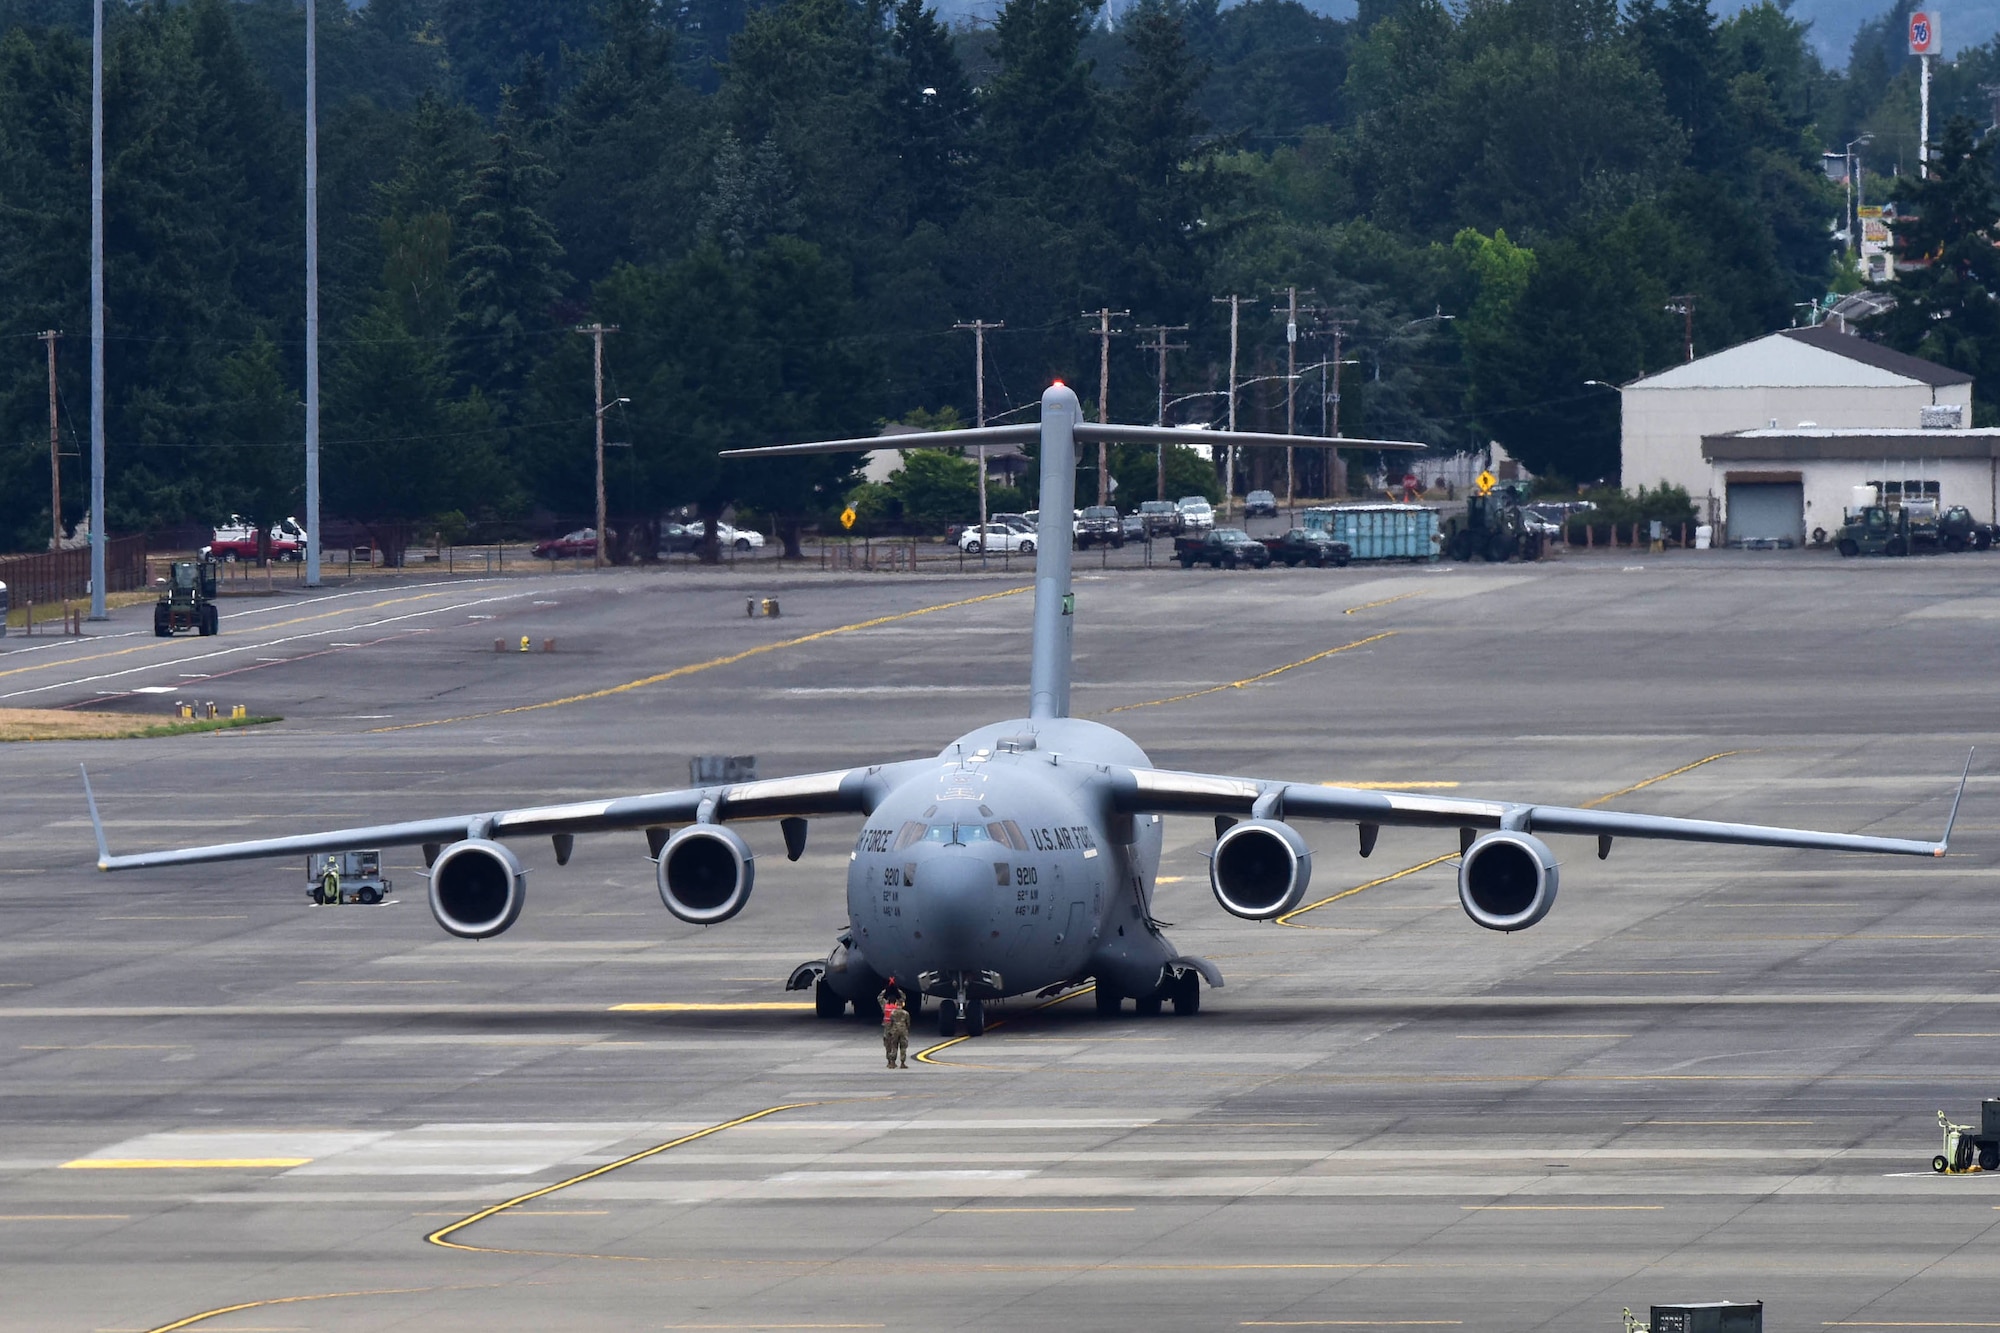 62nd Aircraft Maintenance Squadron Airmen marshal the first returning aircraft to its parking spot at McChord Field, June 17, 2019, at Joint Base Lewis-McChord. McChord Field aircraft and Airmen were relocated to other west coast bases while the runway was resurfaced. (U.S. Air Force photo by Airman 1st Class Sara Hoerichs)